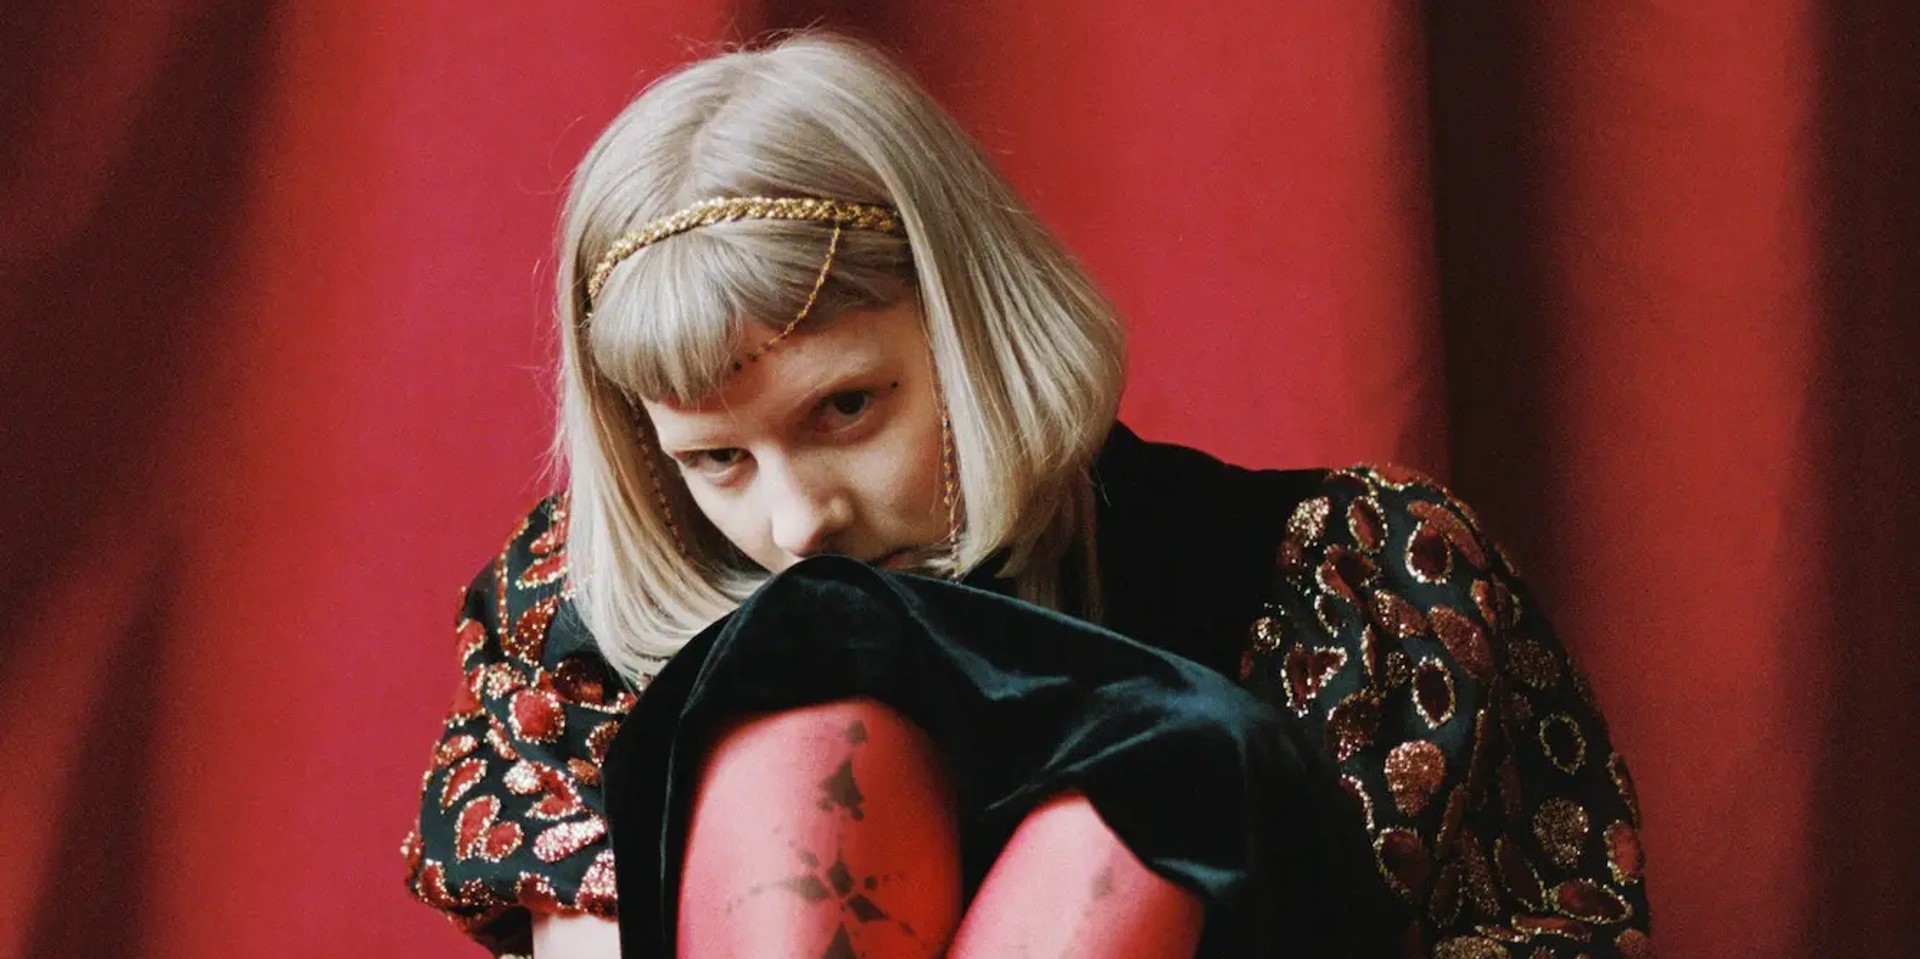 AURORA announces Asia tour in 2023 - concerts in Tokyo, Seoul, Singapore, Taipei, and Bangkok confirmed